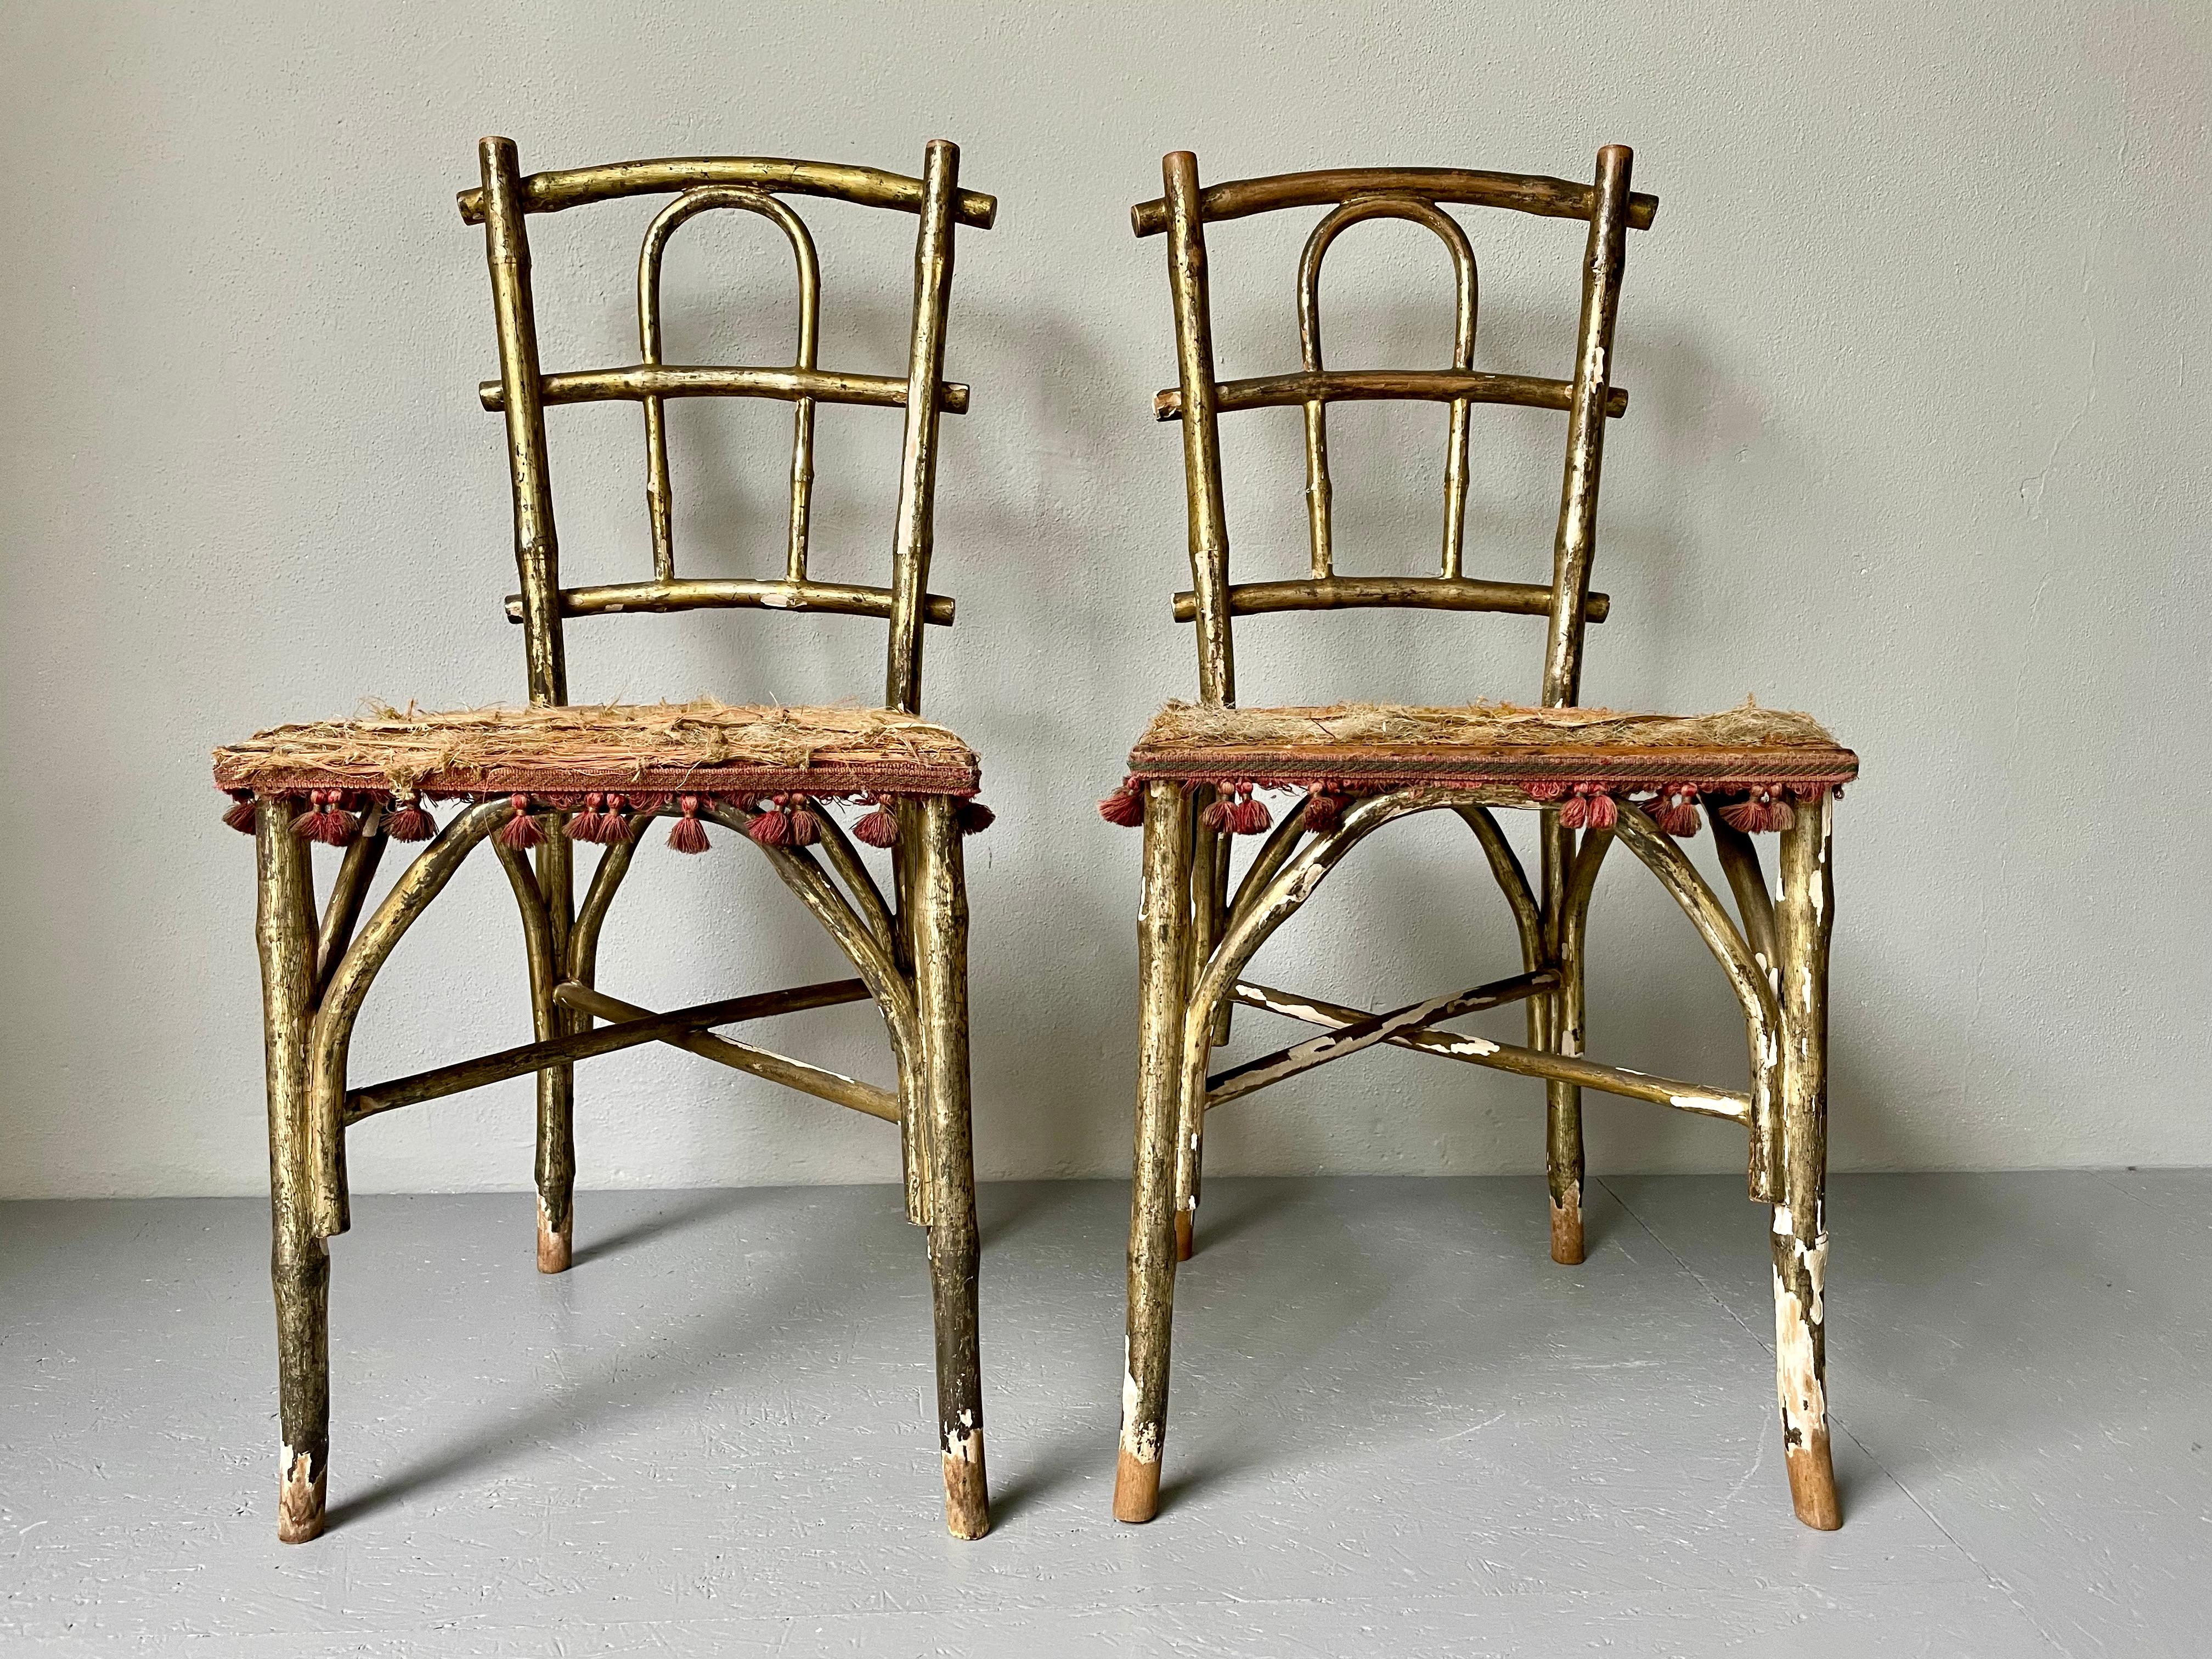 19th Century bentwood parlor chairs by Thonet. Beautiful gold patina & faded fabric. Both chairs show heavy signs of their age, flaking gold patina, washed out seat fabric & yet the charm remains. Both chairs have attribution marks from Thonet.